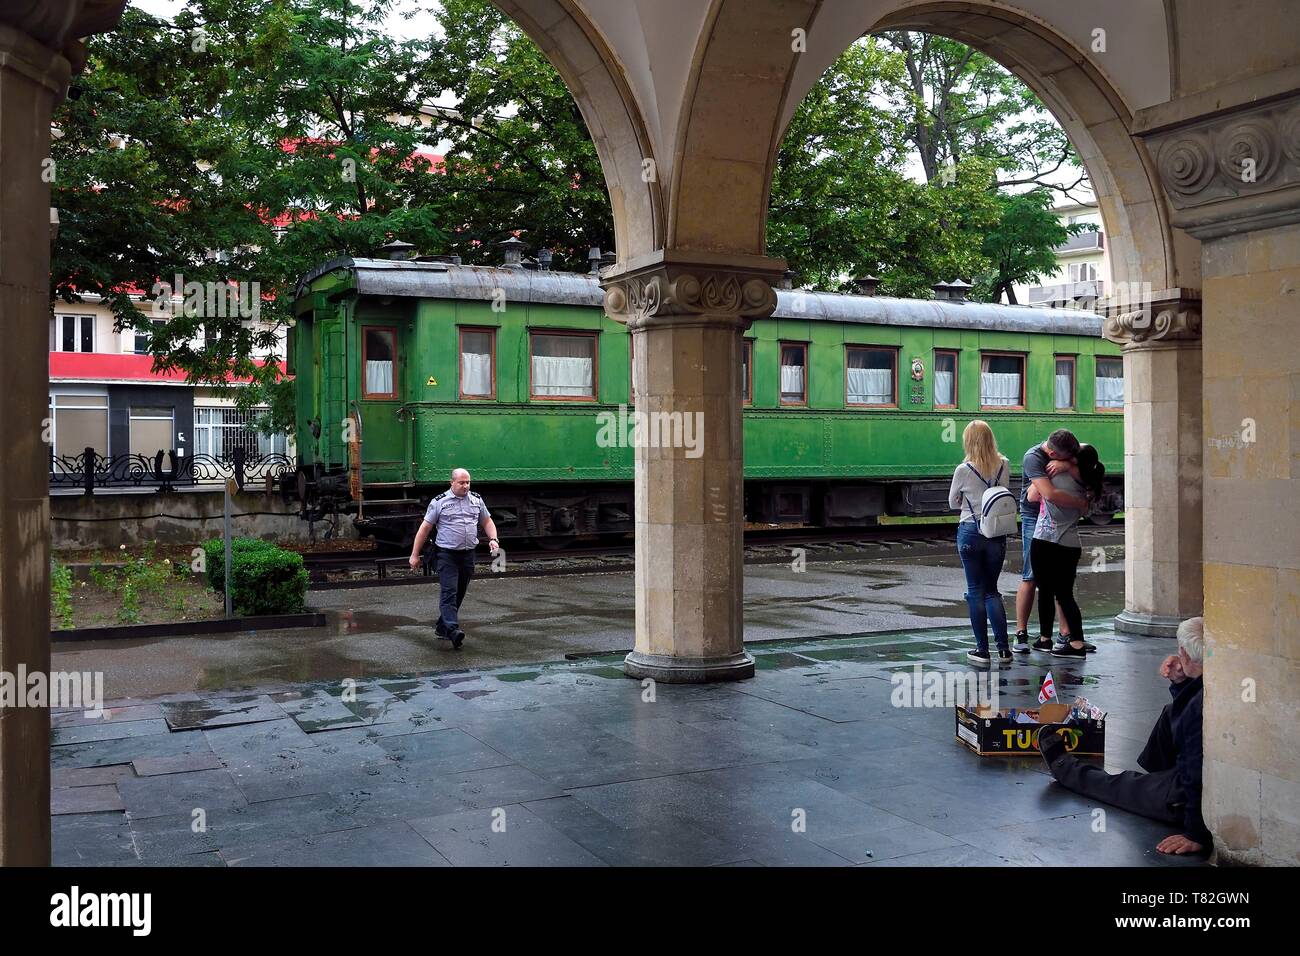 Georgia, Shida Kartli, Gori, hometown of Joseph Stalin, Stalin museum, green Pullman Stalin's personal railway carriage which is armour plated and weighs 83 tons Stock Photo